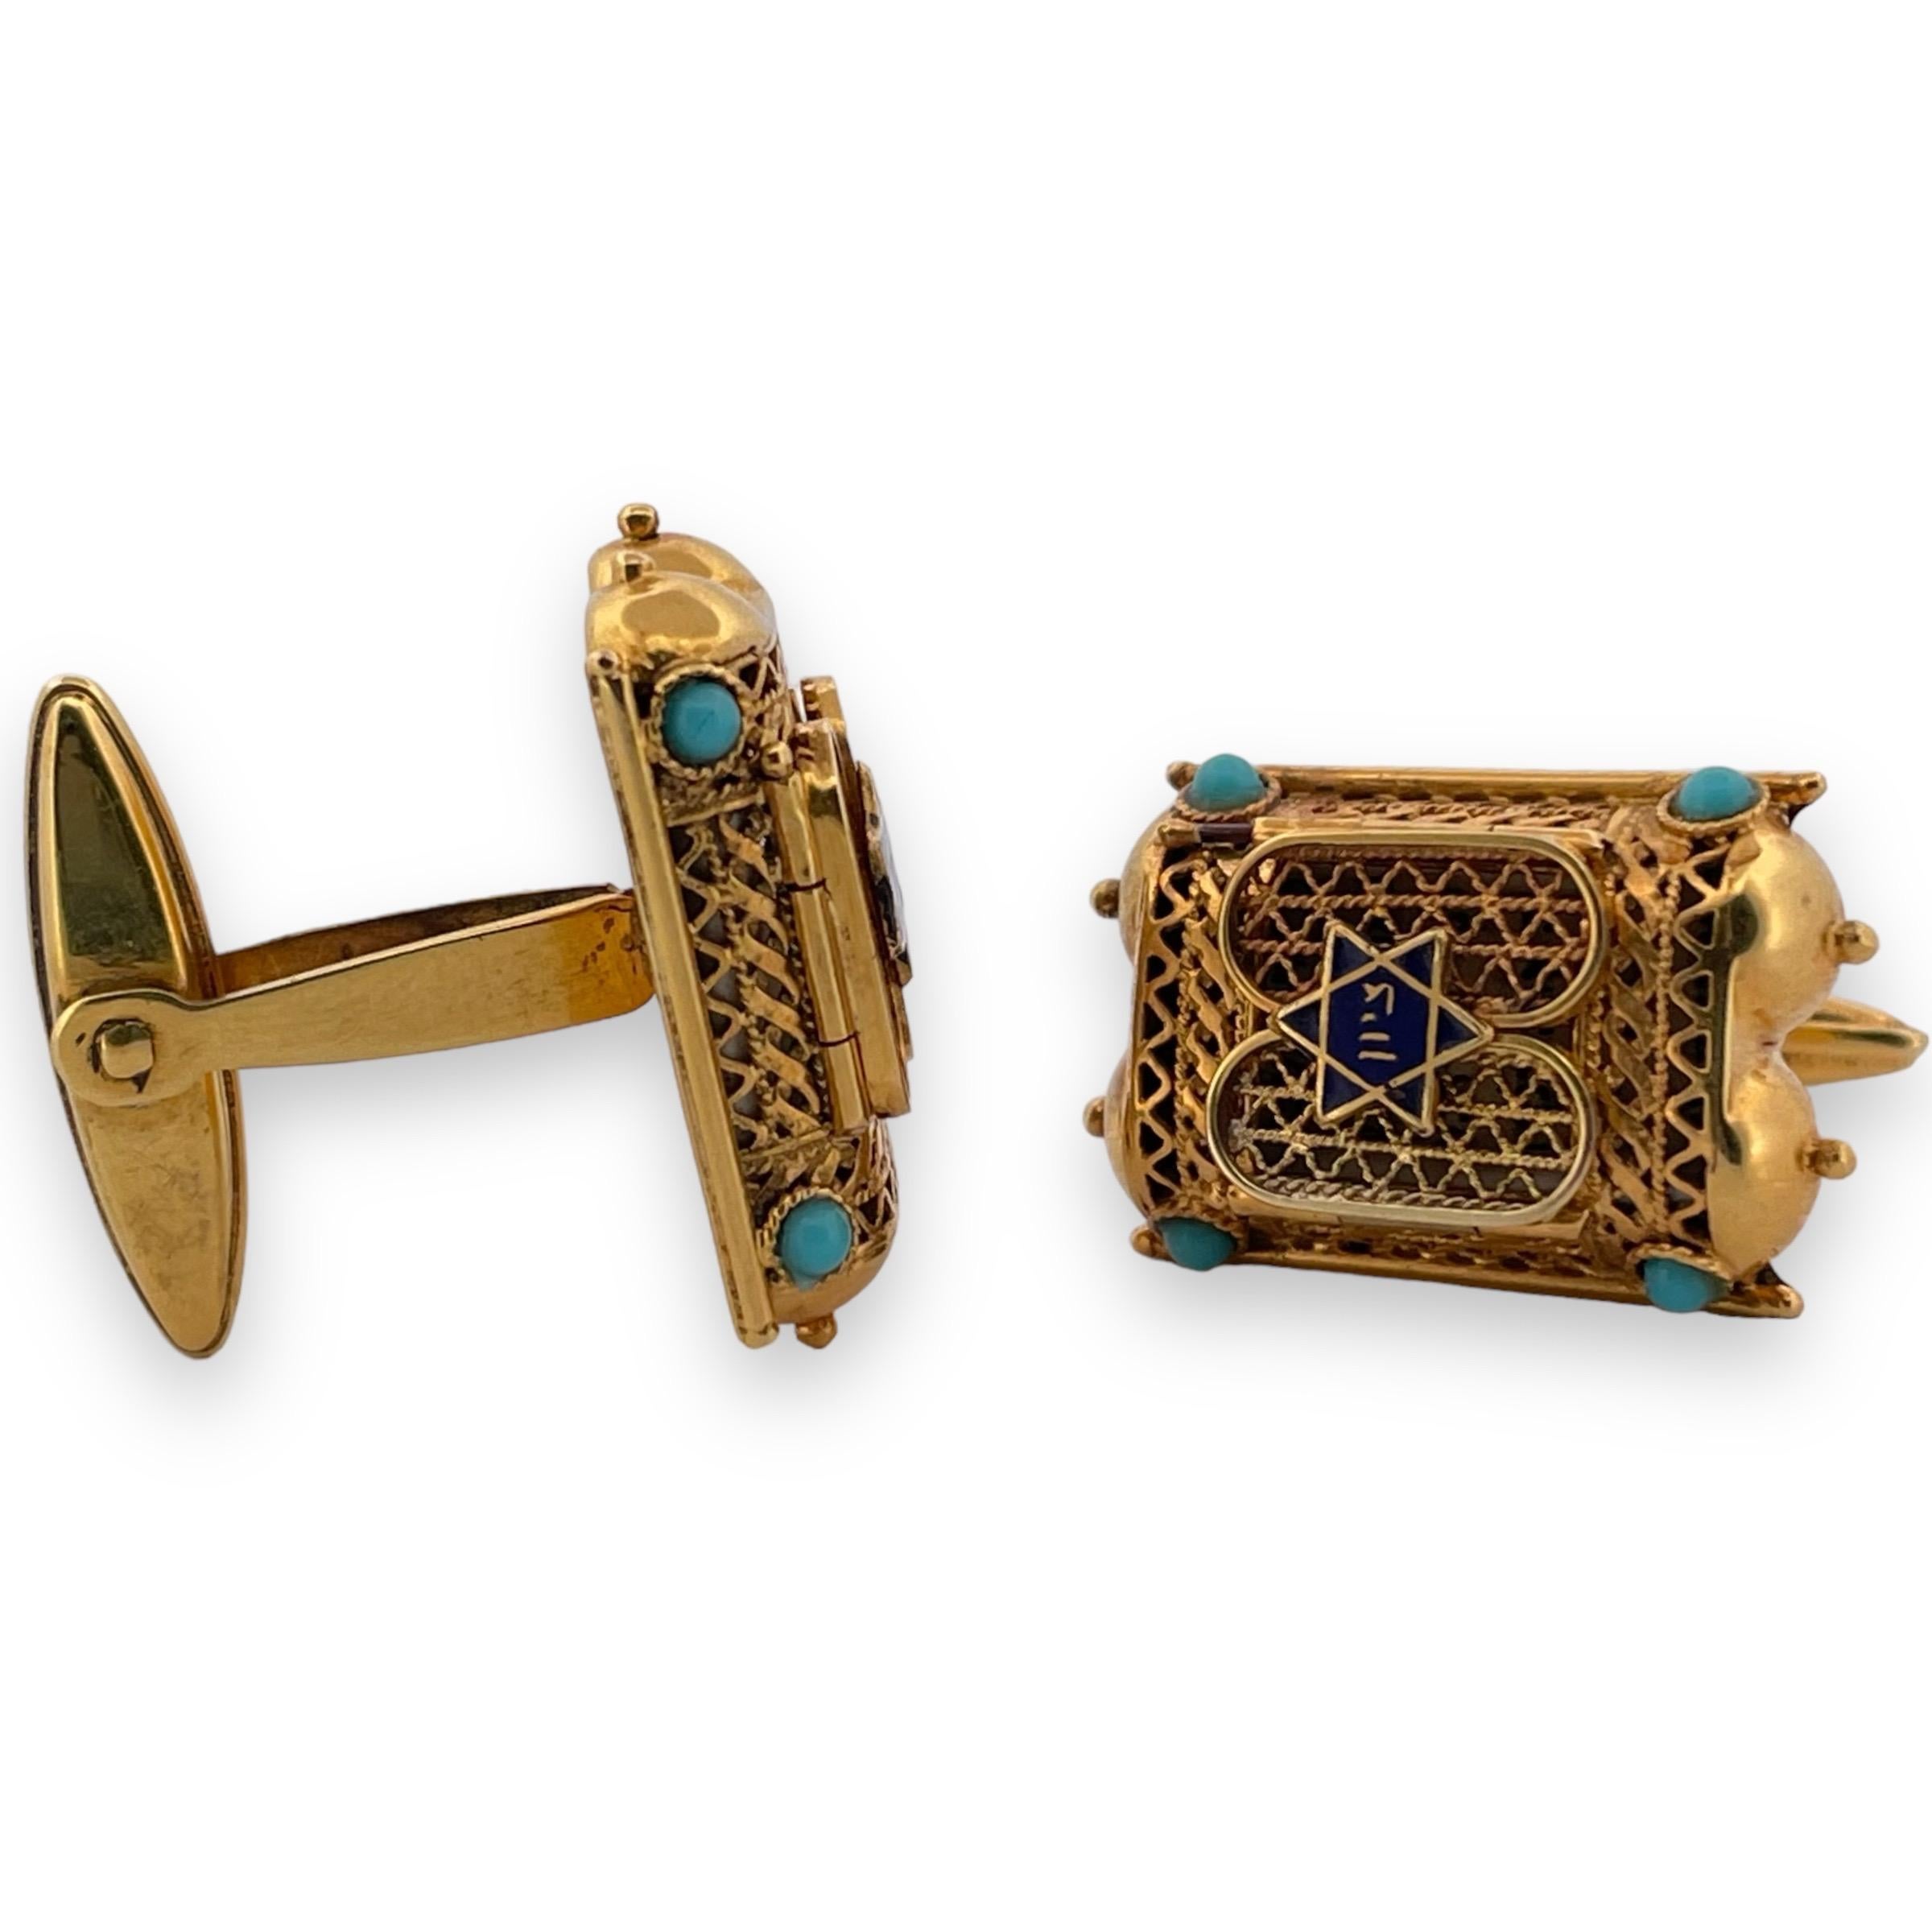 Add a touch of distinction to your attire with these elegant 14K Yellow Gold Torah Script Turquoise Cufflinks. Weighing 10.43 grams, these cufflinks are a testament to refined craftsmanship, featuring a stunning inlay of turquoise that is delicately